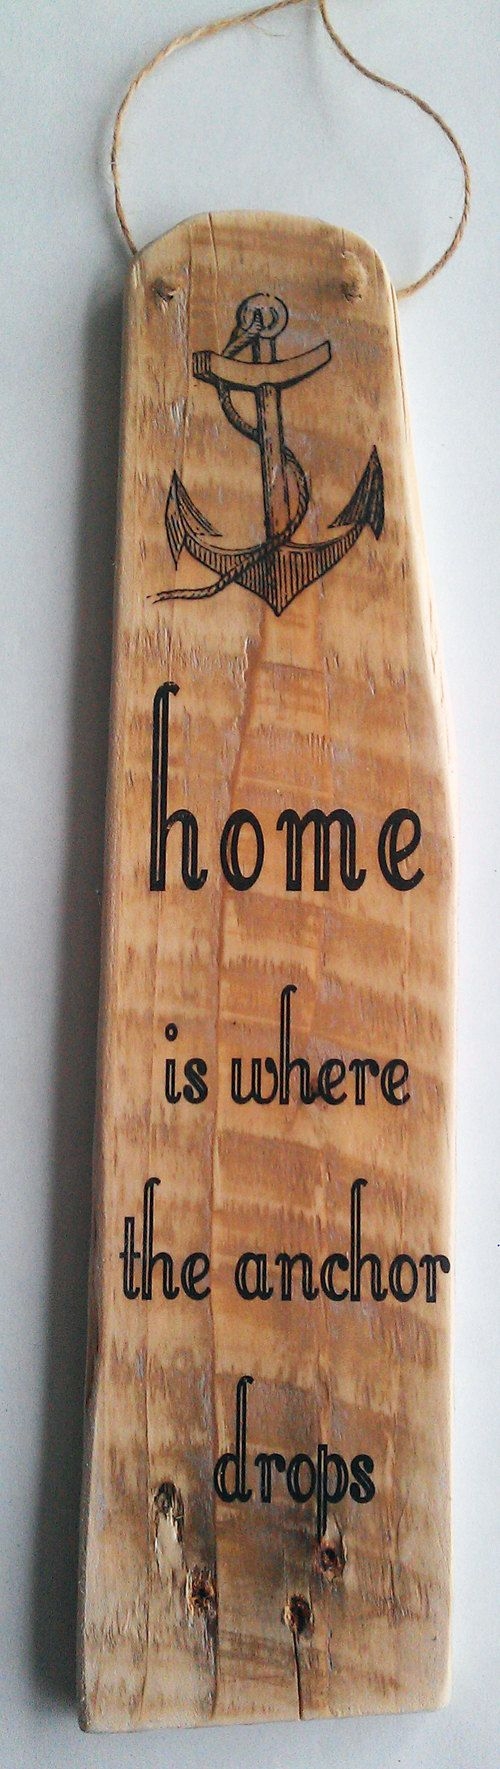 Handmade pallet sign home is where the